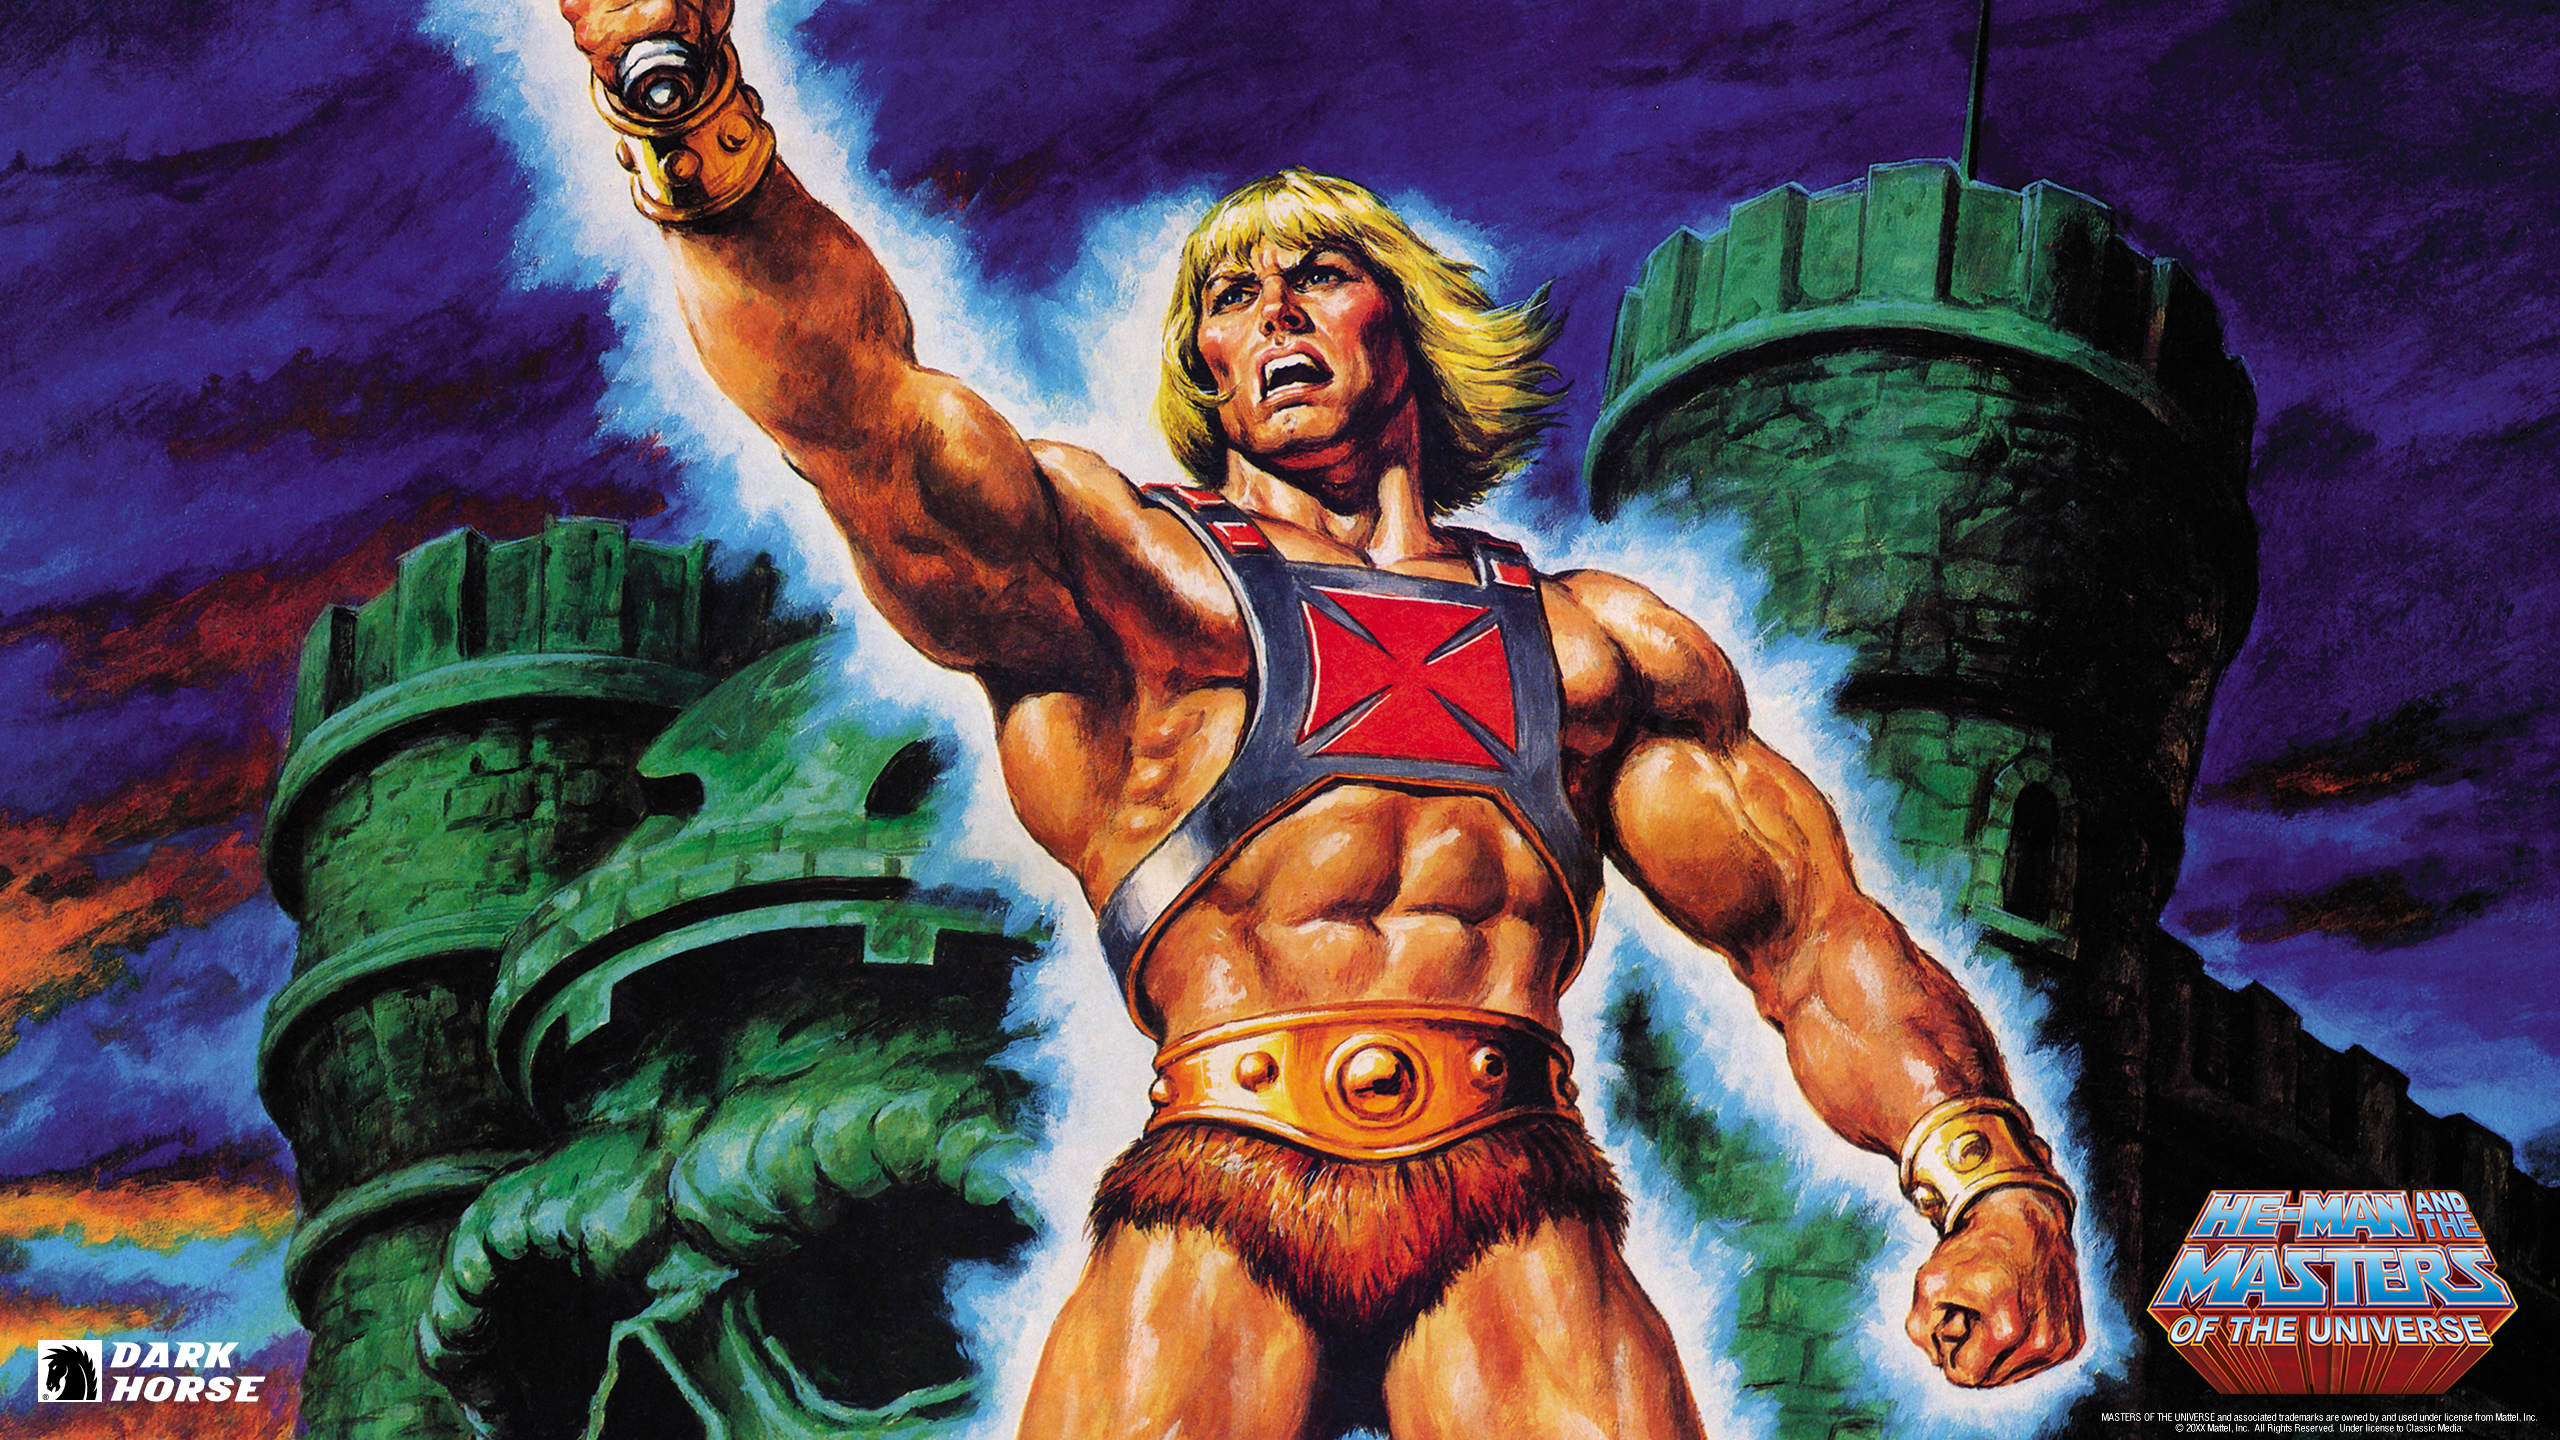 He Man And The Masters Of The Universe - Desktops - Dark Horse Comics